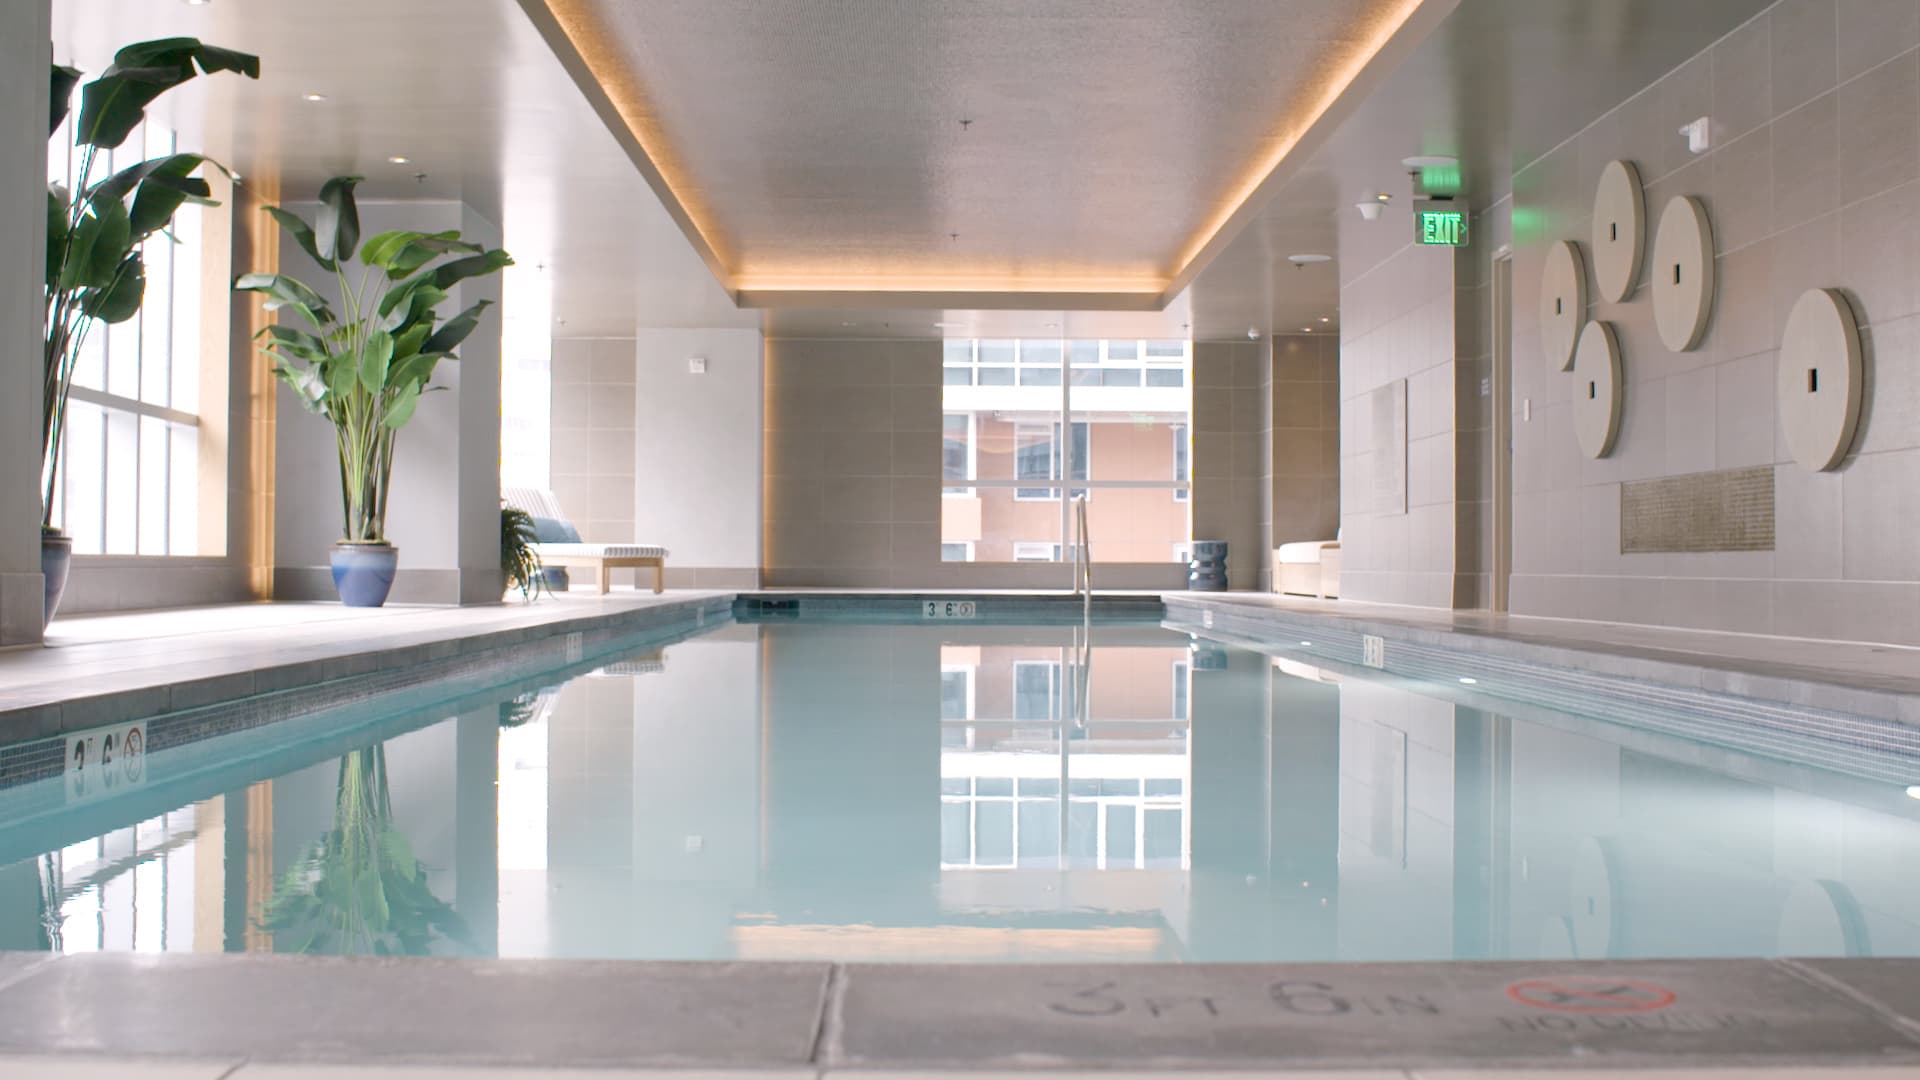 The apartment building has an indoor pool.